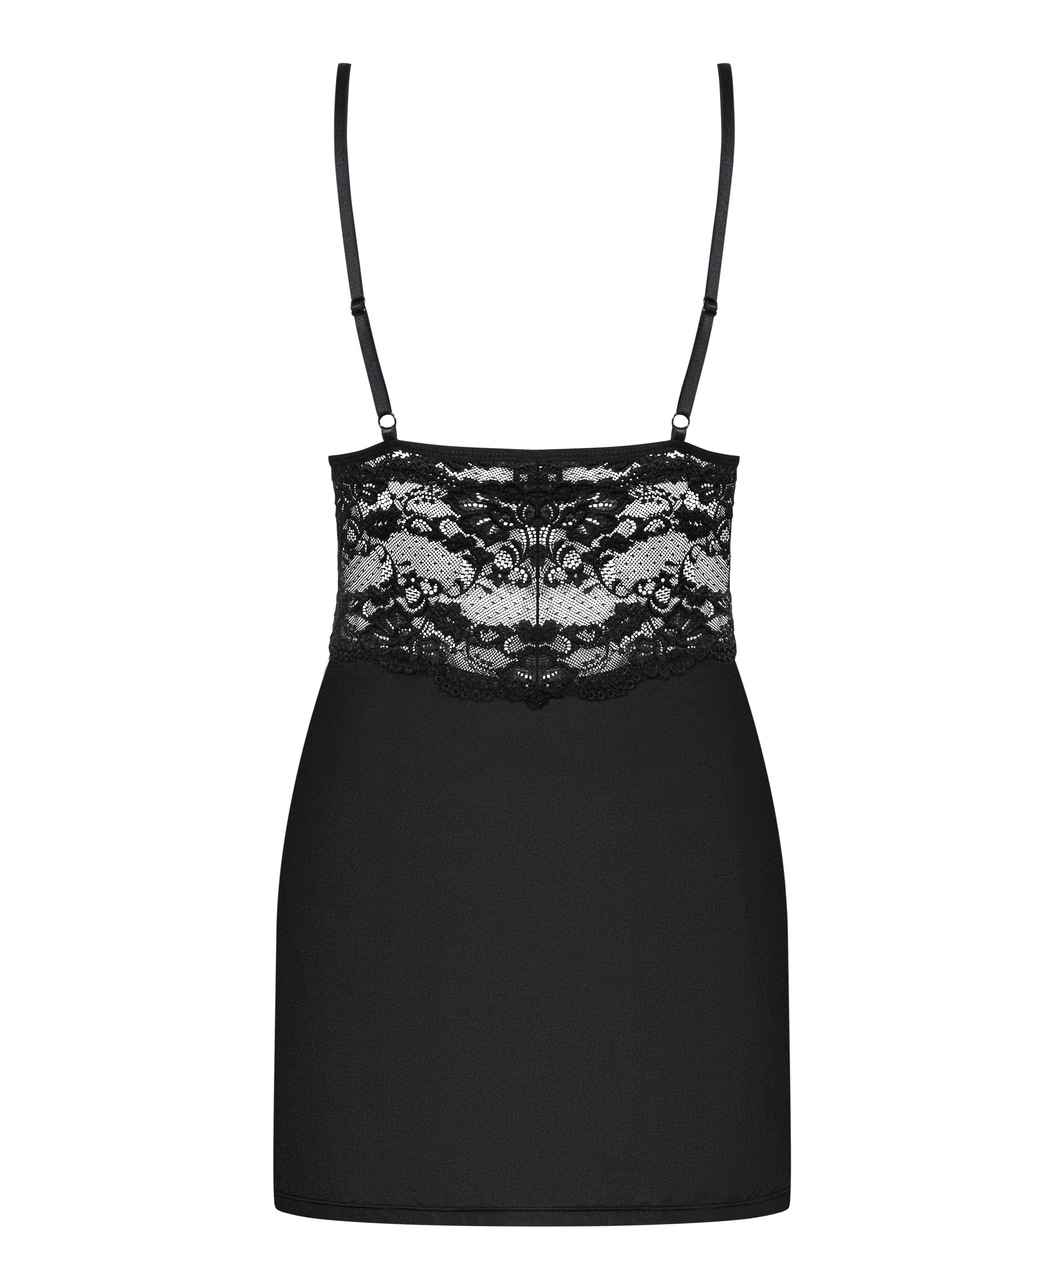 Obsessive black chemise with padded cups